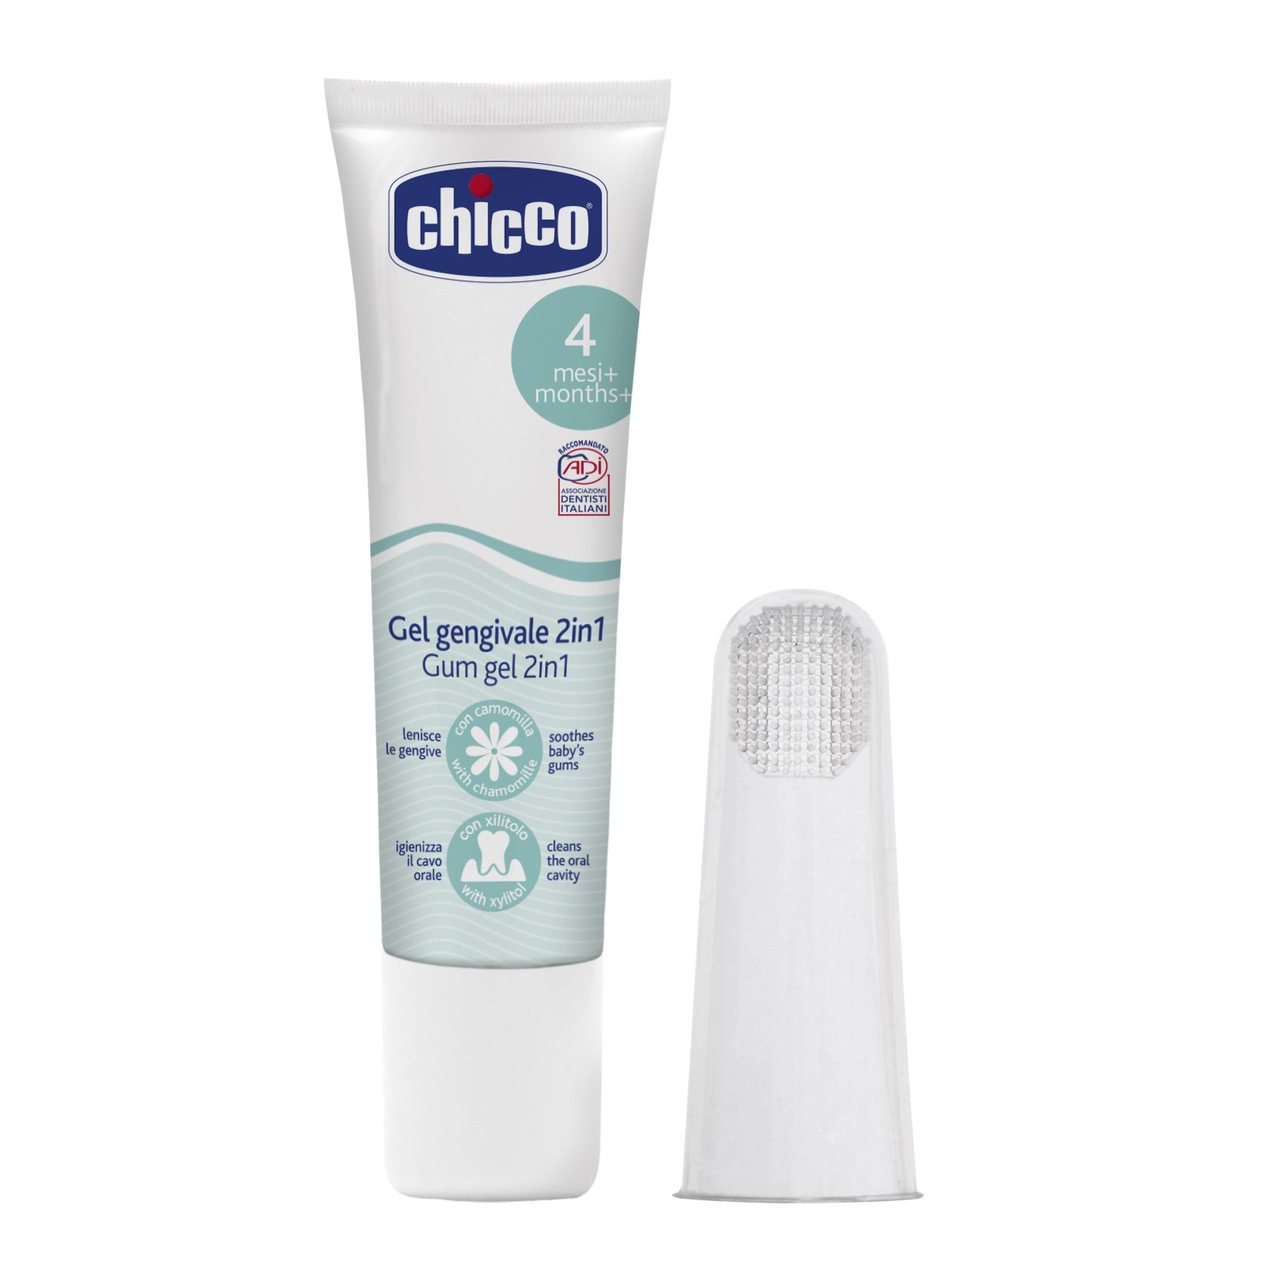 Chicco Kit Primeiros Meses Oral Care 4m+